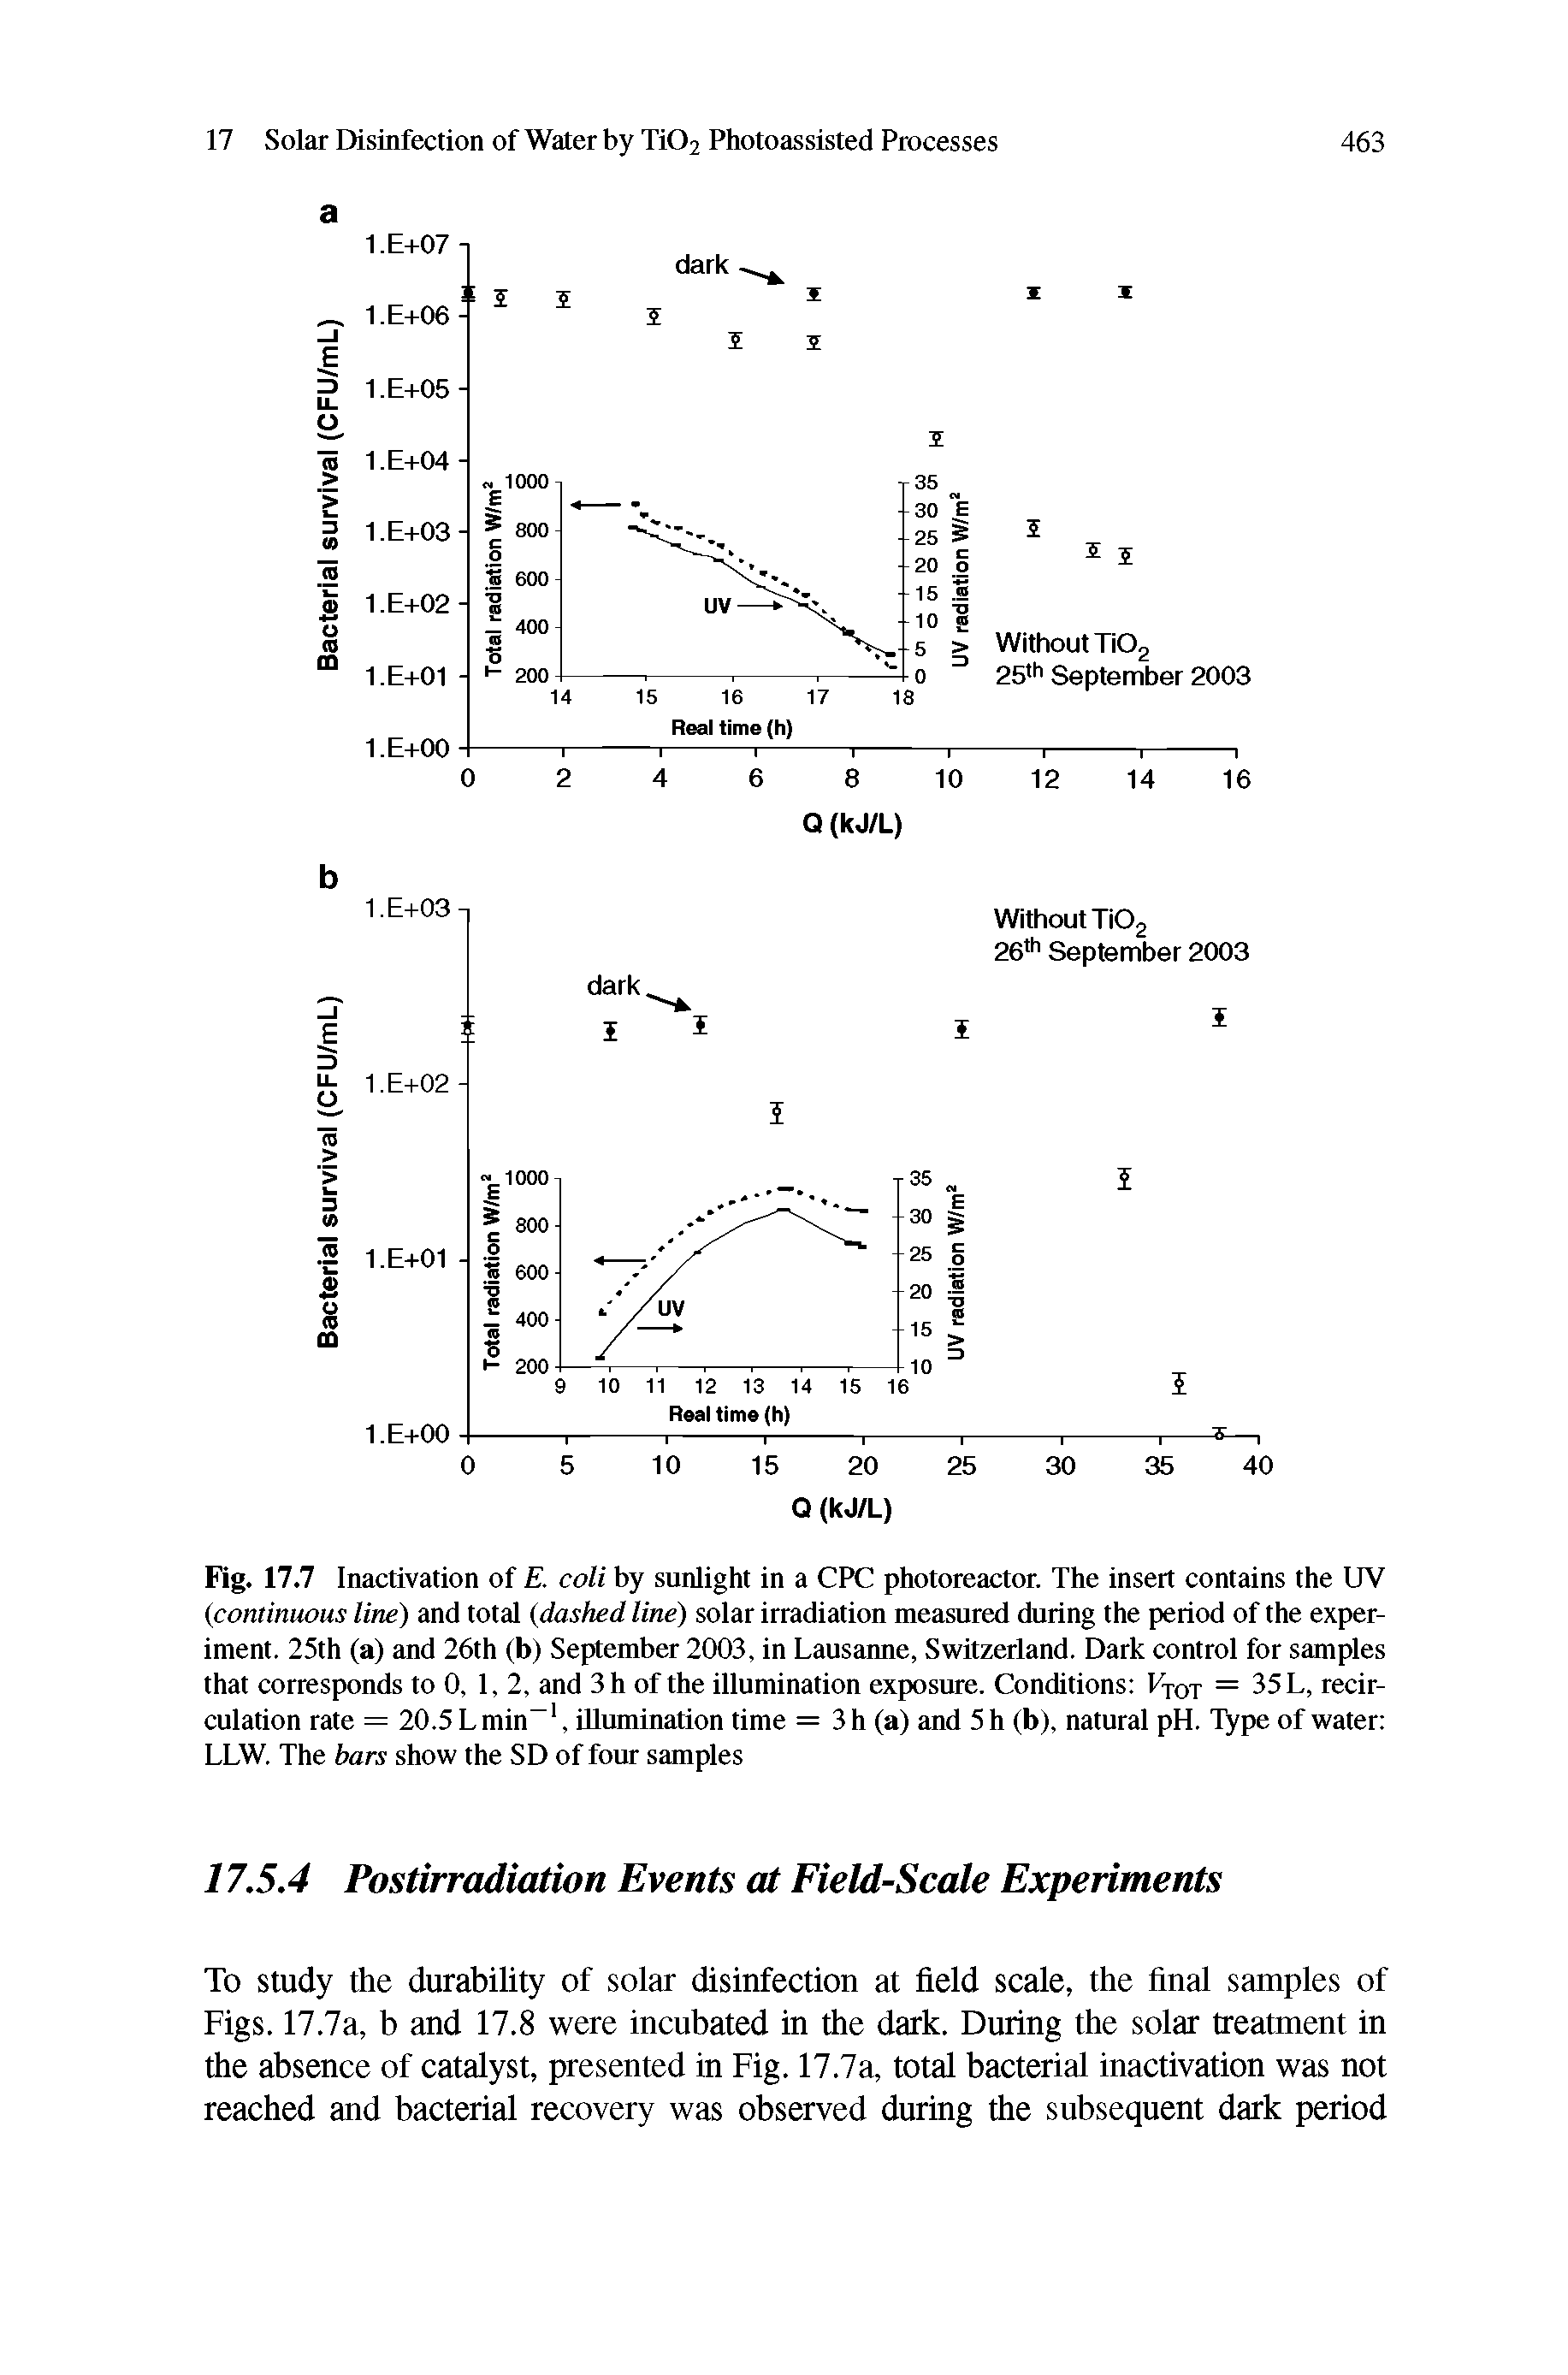 Fig. 17.7 Inactivation of E. coli by sunlight in a CPC photoreactor. The insert contains the UV (continuous line) and total (dashed line) solar irradiation measured during the period of the experiment. 25th (a) and 26th (b) September 2003, in Lausanne, Switzerland. Dark control for samples that corresponds to 0, 1, 2, and 3h of the illumination exposure. Conditions VT0T = 35 L, recirculation rate = 20.5 L min-1, illumination time = 3 h (a) and 5 h (b), natural pH. Type of water LLW. The bars show the SD of four samples...